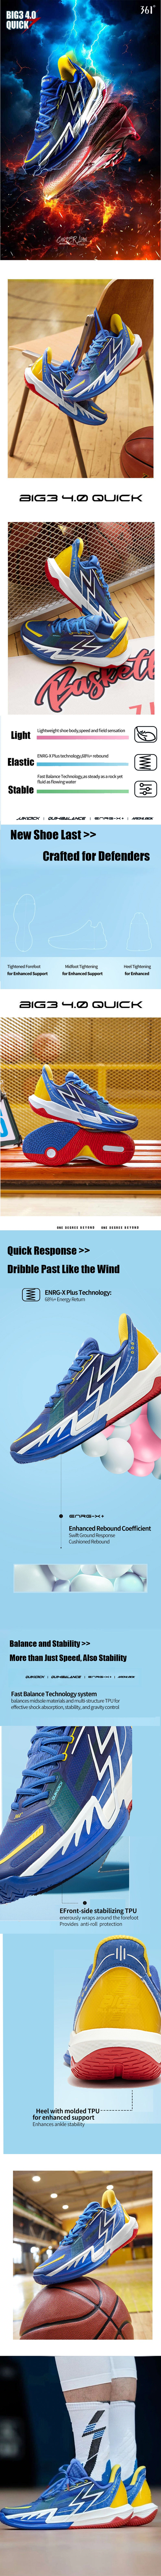 Speed, agility in Blue/White/Yellow. ENRG-X Plus tech ensures 68%+ rebound. Crafted for defenders,tightened forefoot, midfoot,and heel for support/lockdown. Quick response for dribbling. Fast Balance tech for stability. TPU for anti-roll. Molded TPU enhances ankle stability. Transparent texture for cultural highlights.